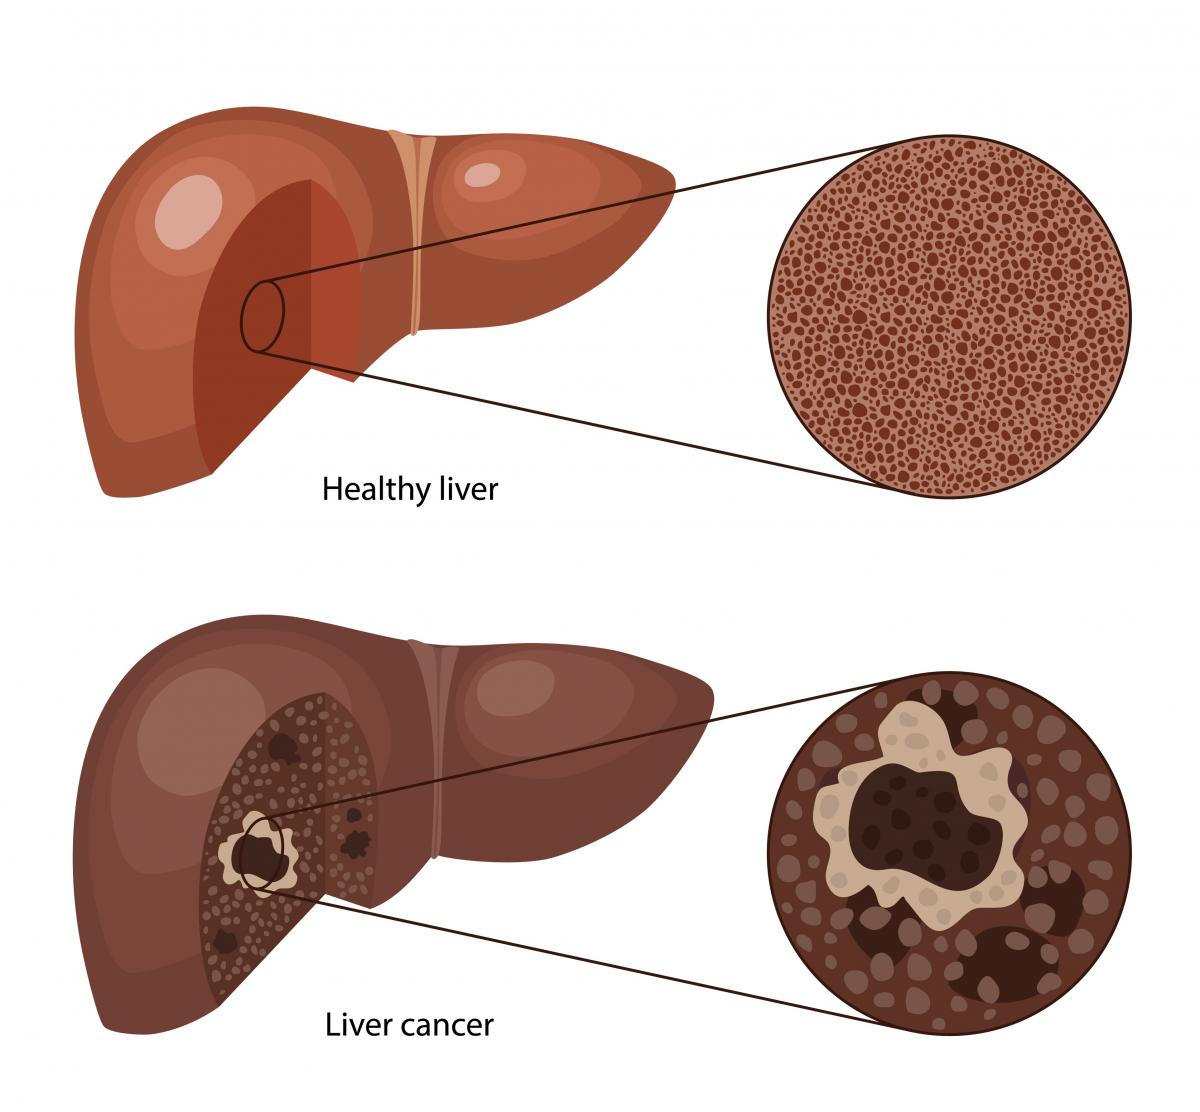 Liver cancer graphic - healthy liver compared to liver cancer